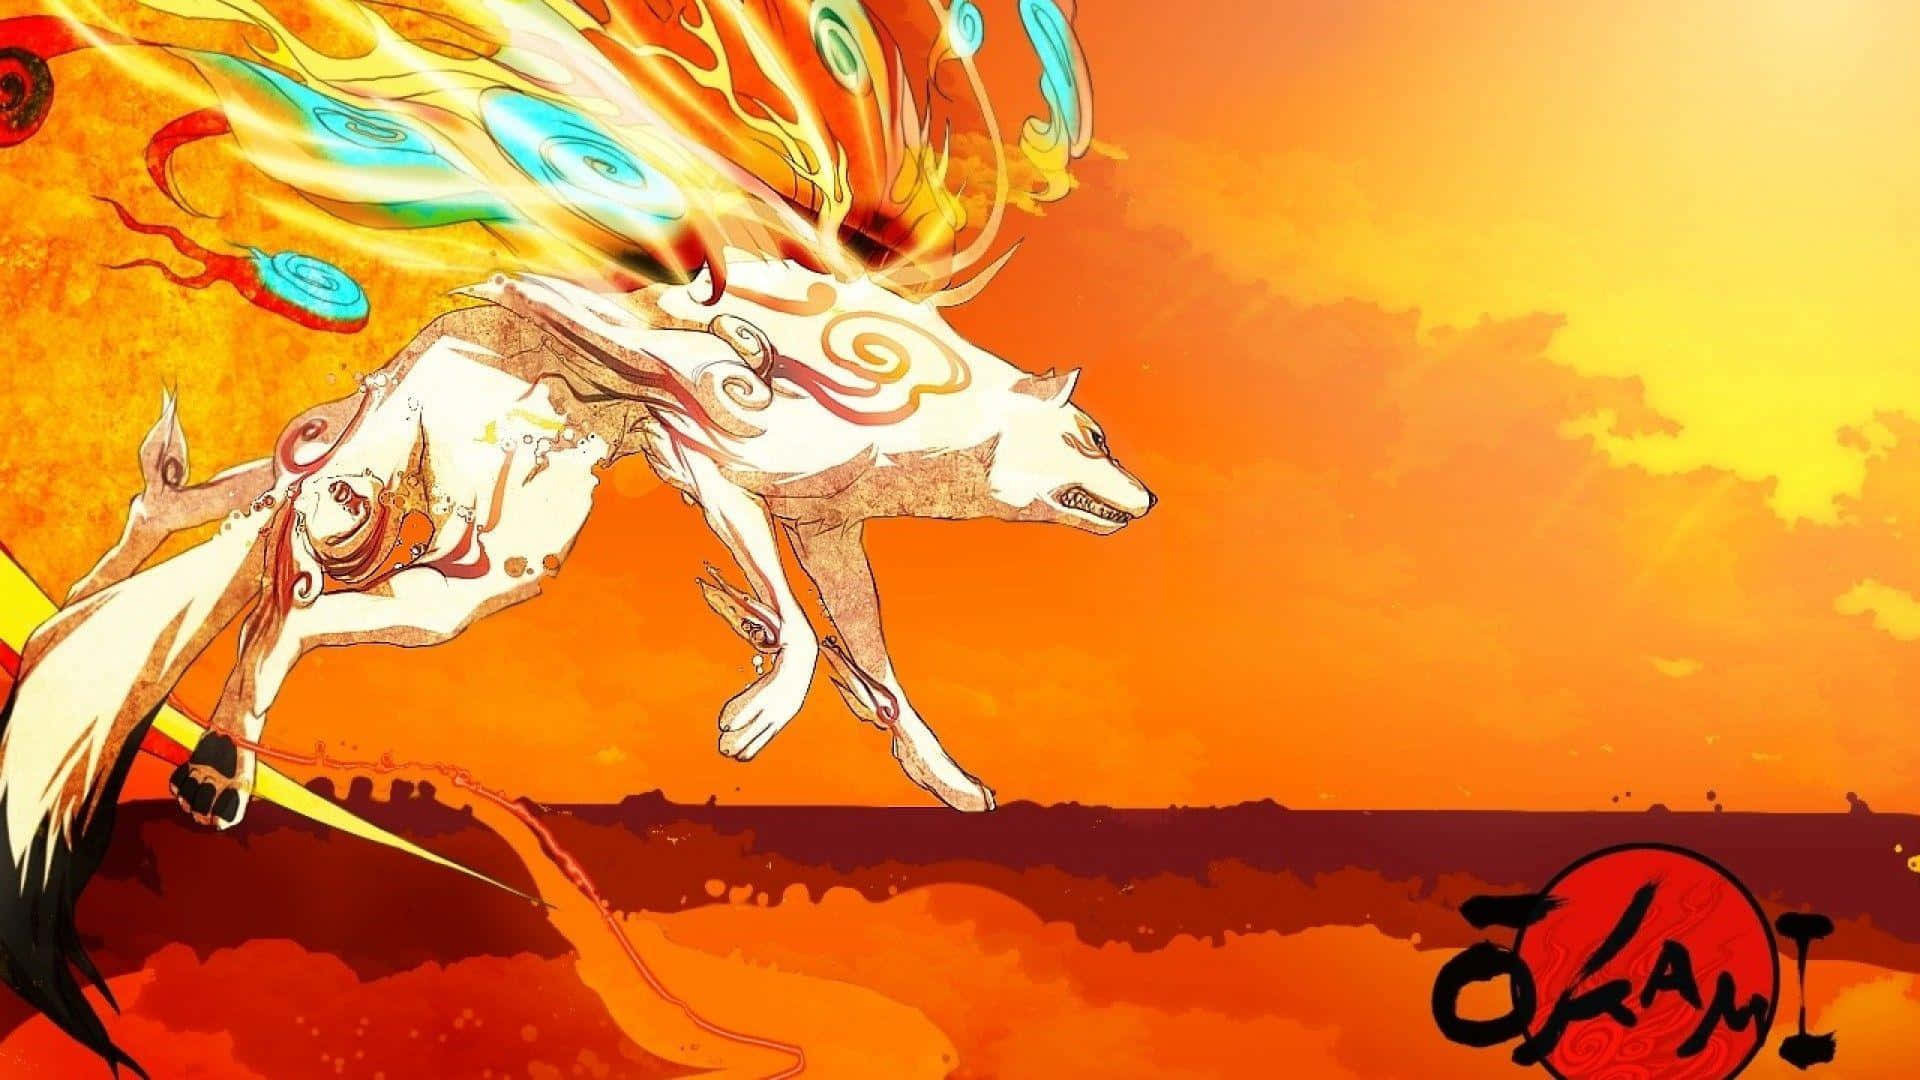 Go on a mythical journey as Amaterasu in Okami HD Wallpaper